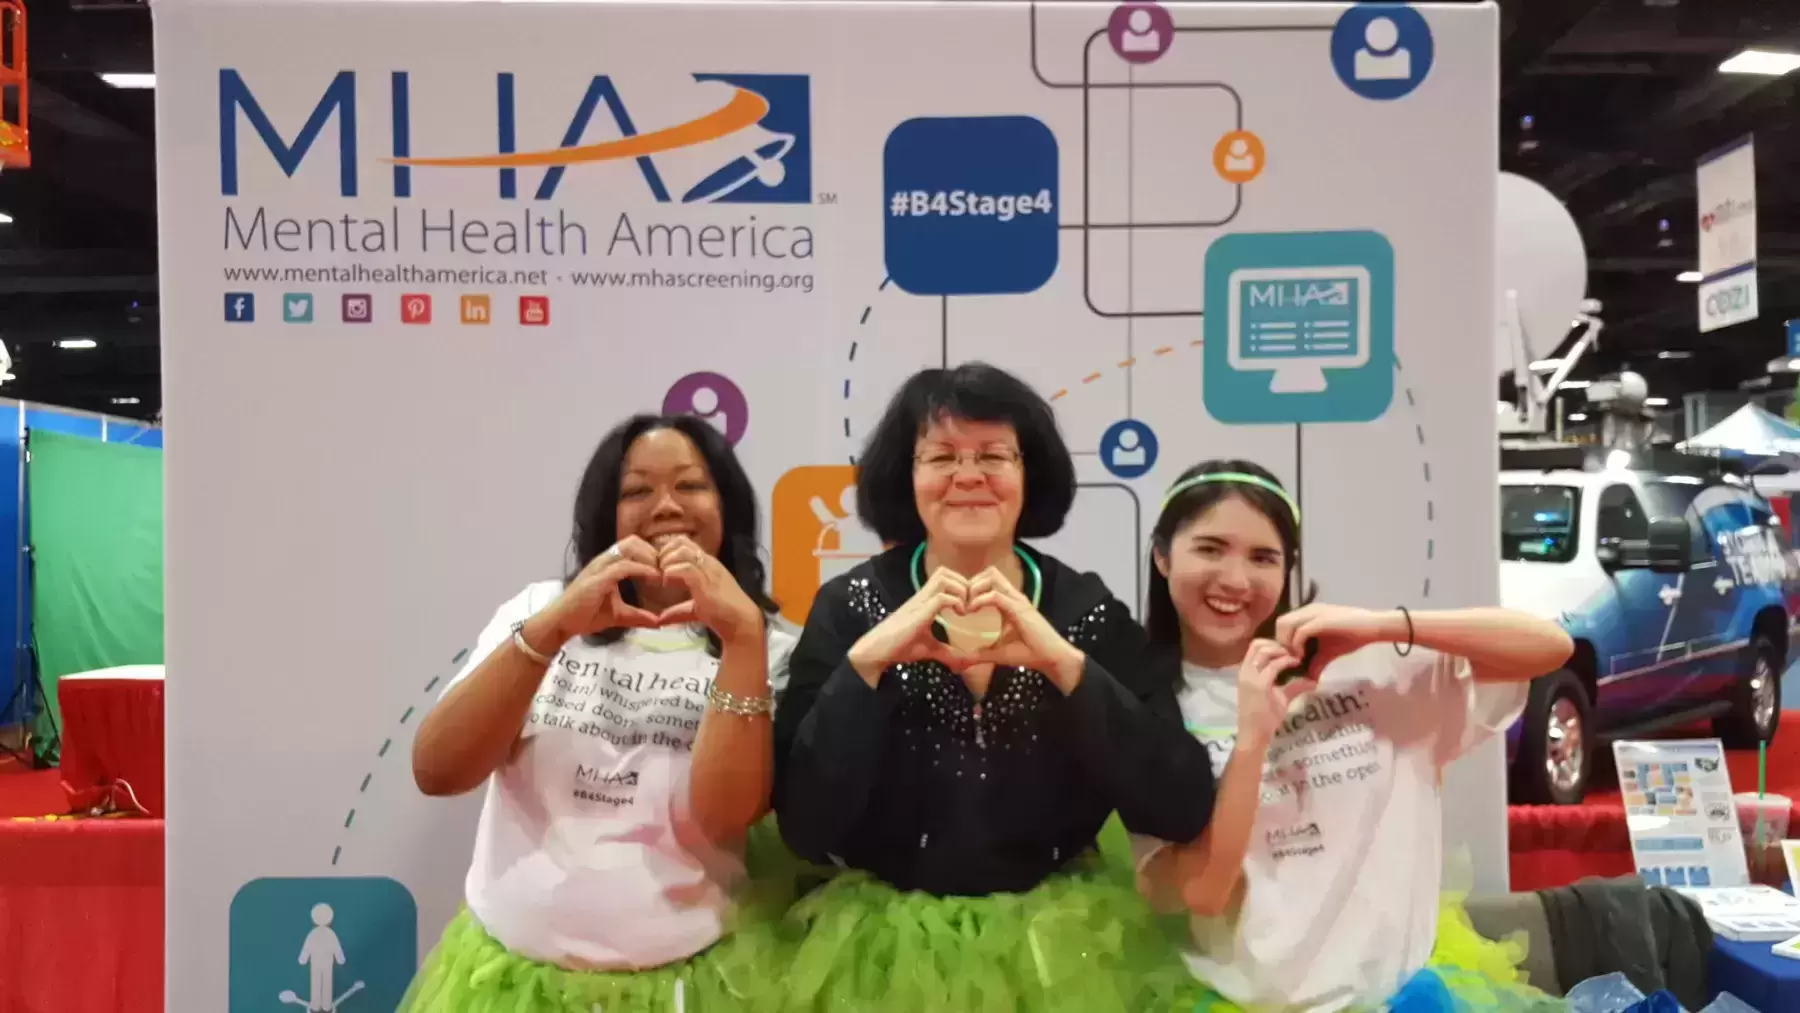 Three women in green tutus posing with their hands in the shapes of hearts in front of an MHA banner